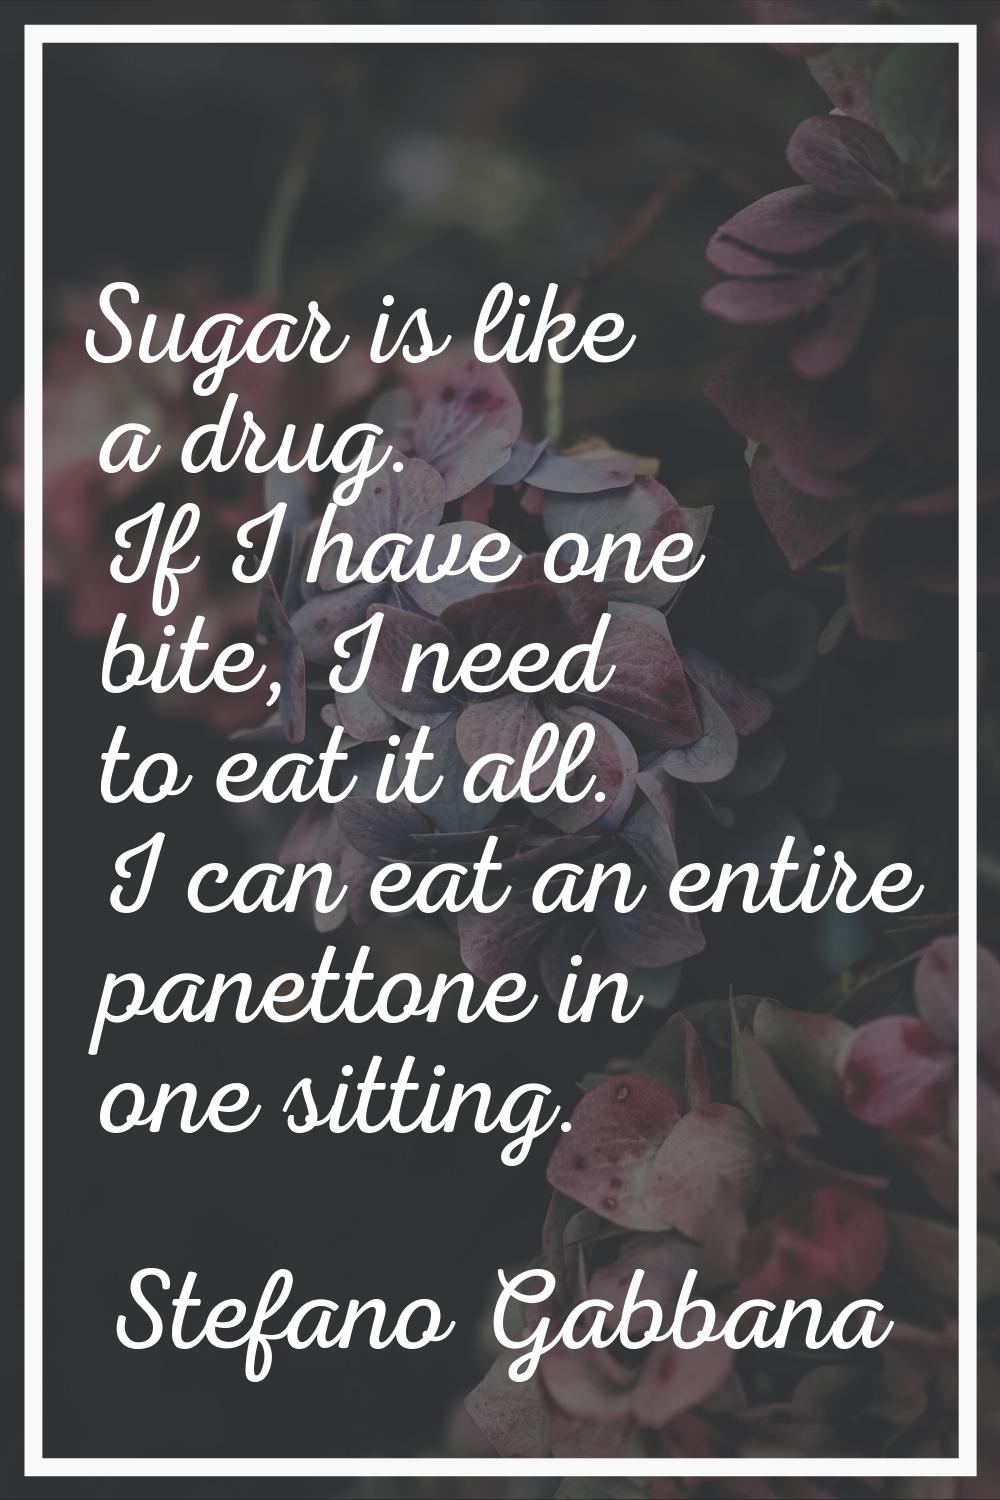 Sugar is like a drug. If I have one bite, I need to eat it all. I can eat an entire panettone in on